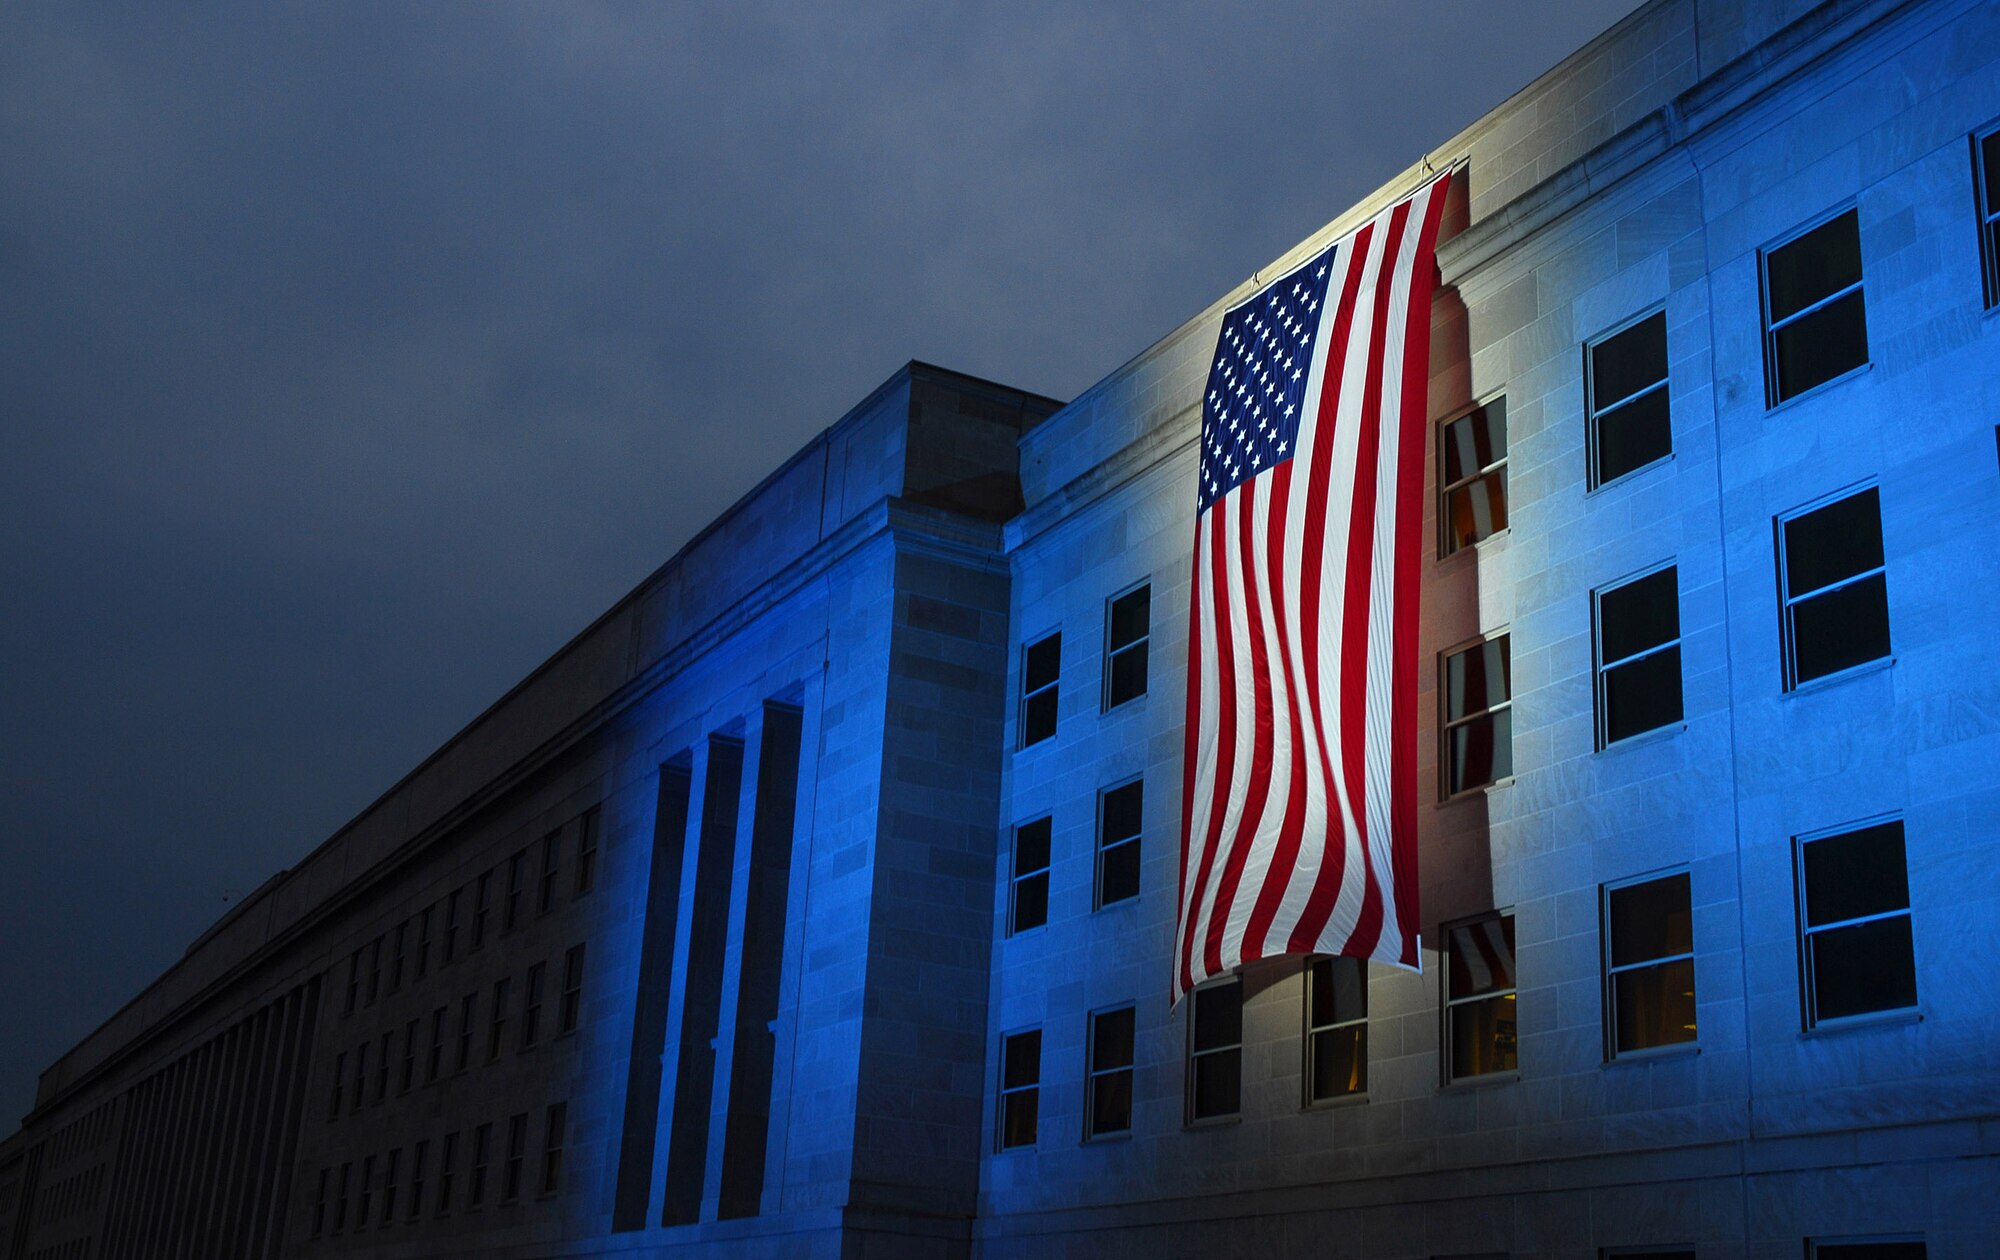 A memorial flag is illuminated near the spot where American Airlines Flight 77 crashed into the Pentagon on Sept. 11, 2001. (U.S. Navy photo/Petty Officer 1st Class Brandan W. Schulze) 